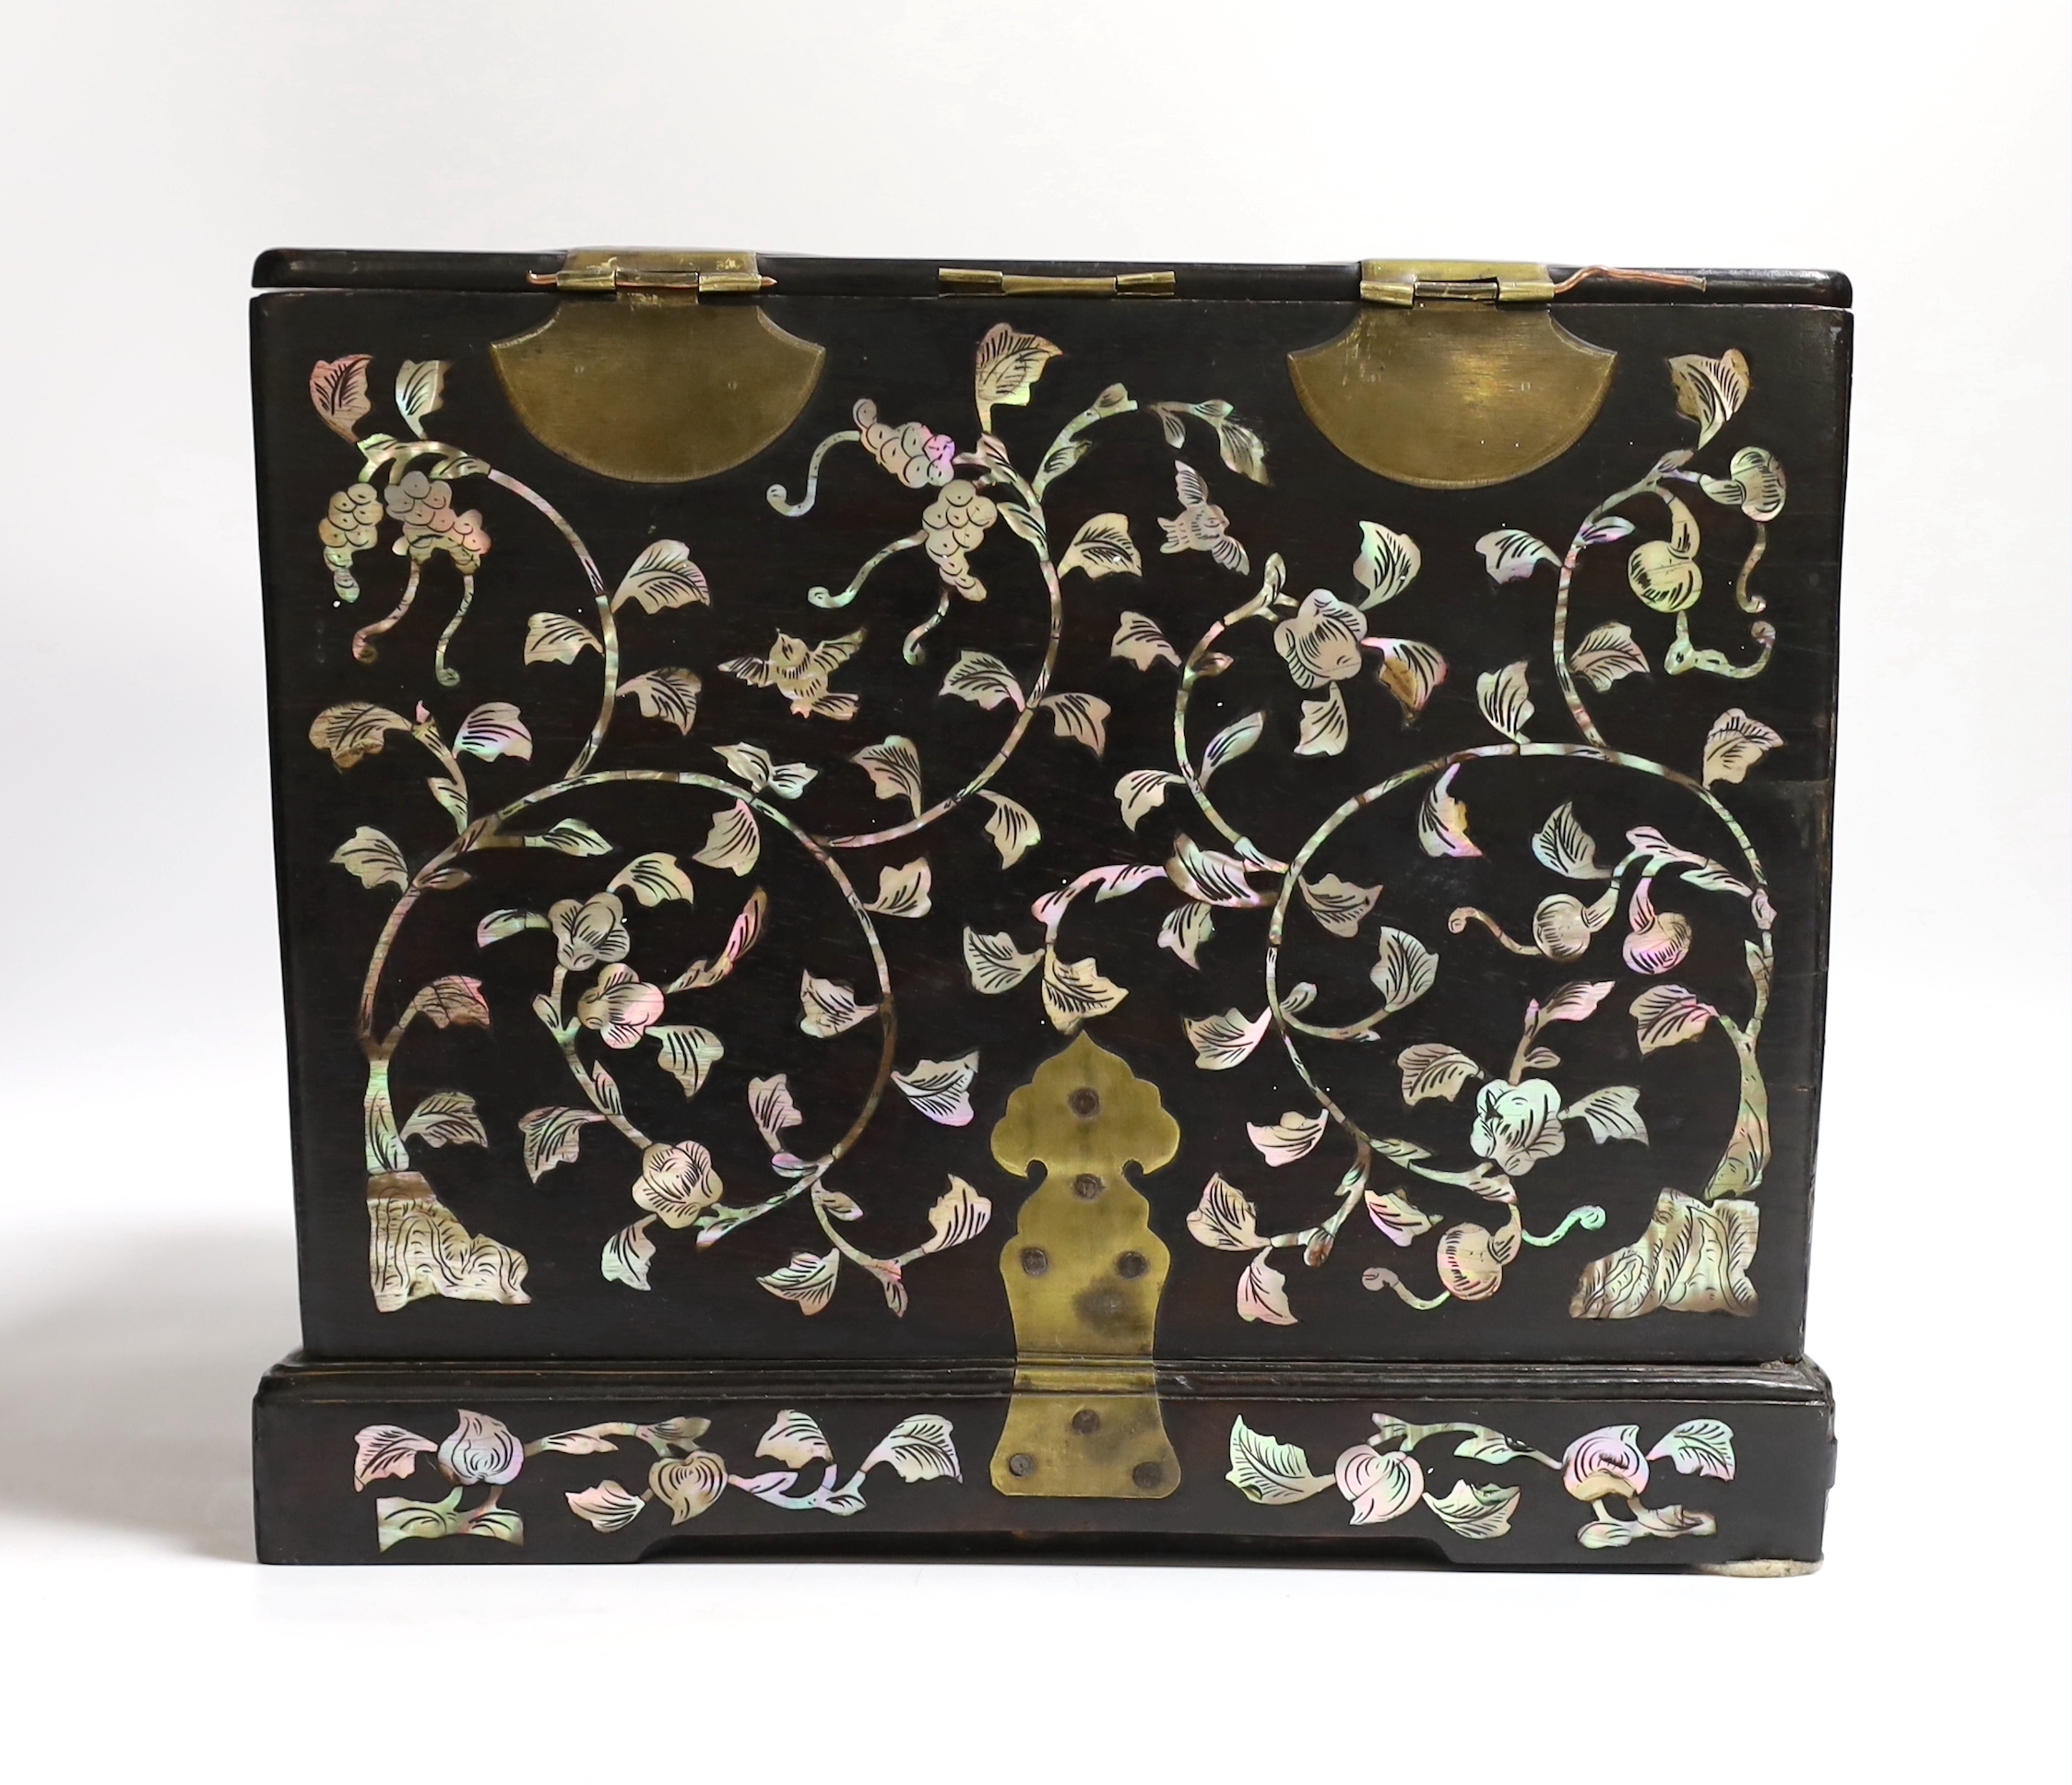 A Chinese mother-of- pearl inlaid hongmu vanity cabinet, late Qing dynasty, with fitted interior comprising a mirror, drawers, etc. 24cm x 31cm x 20cm